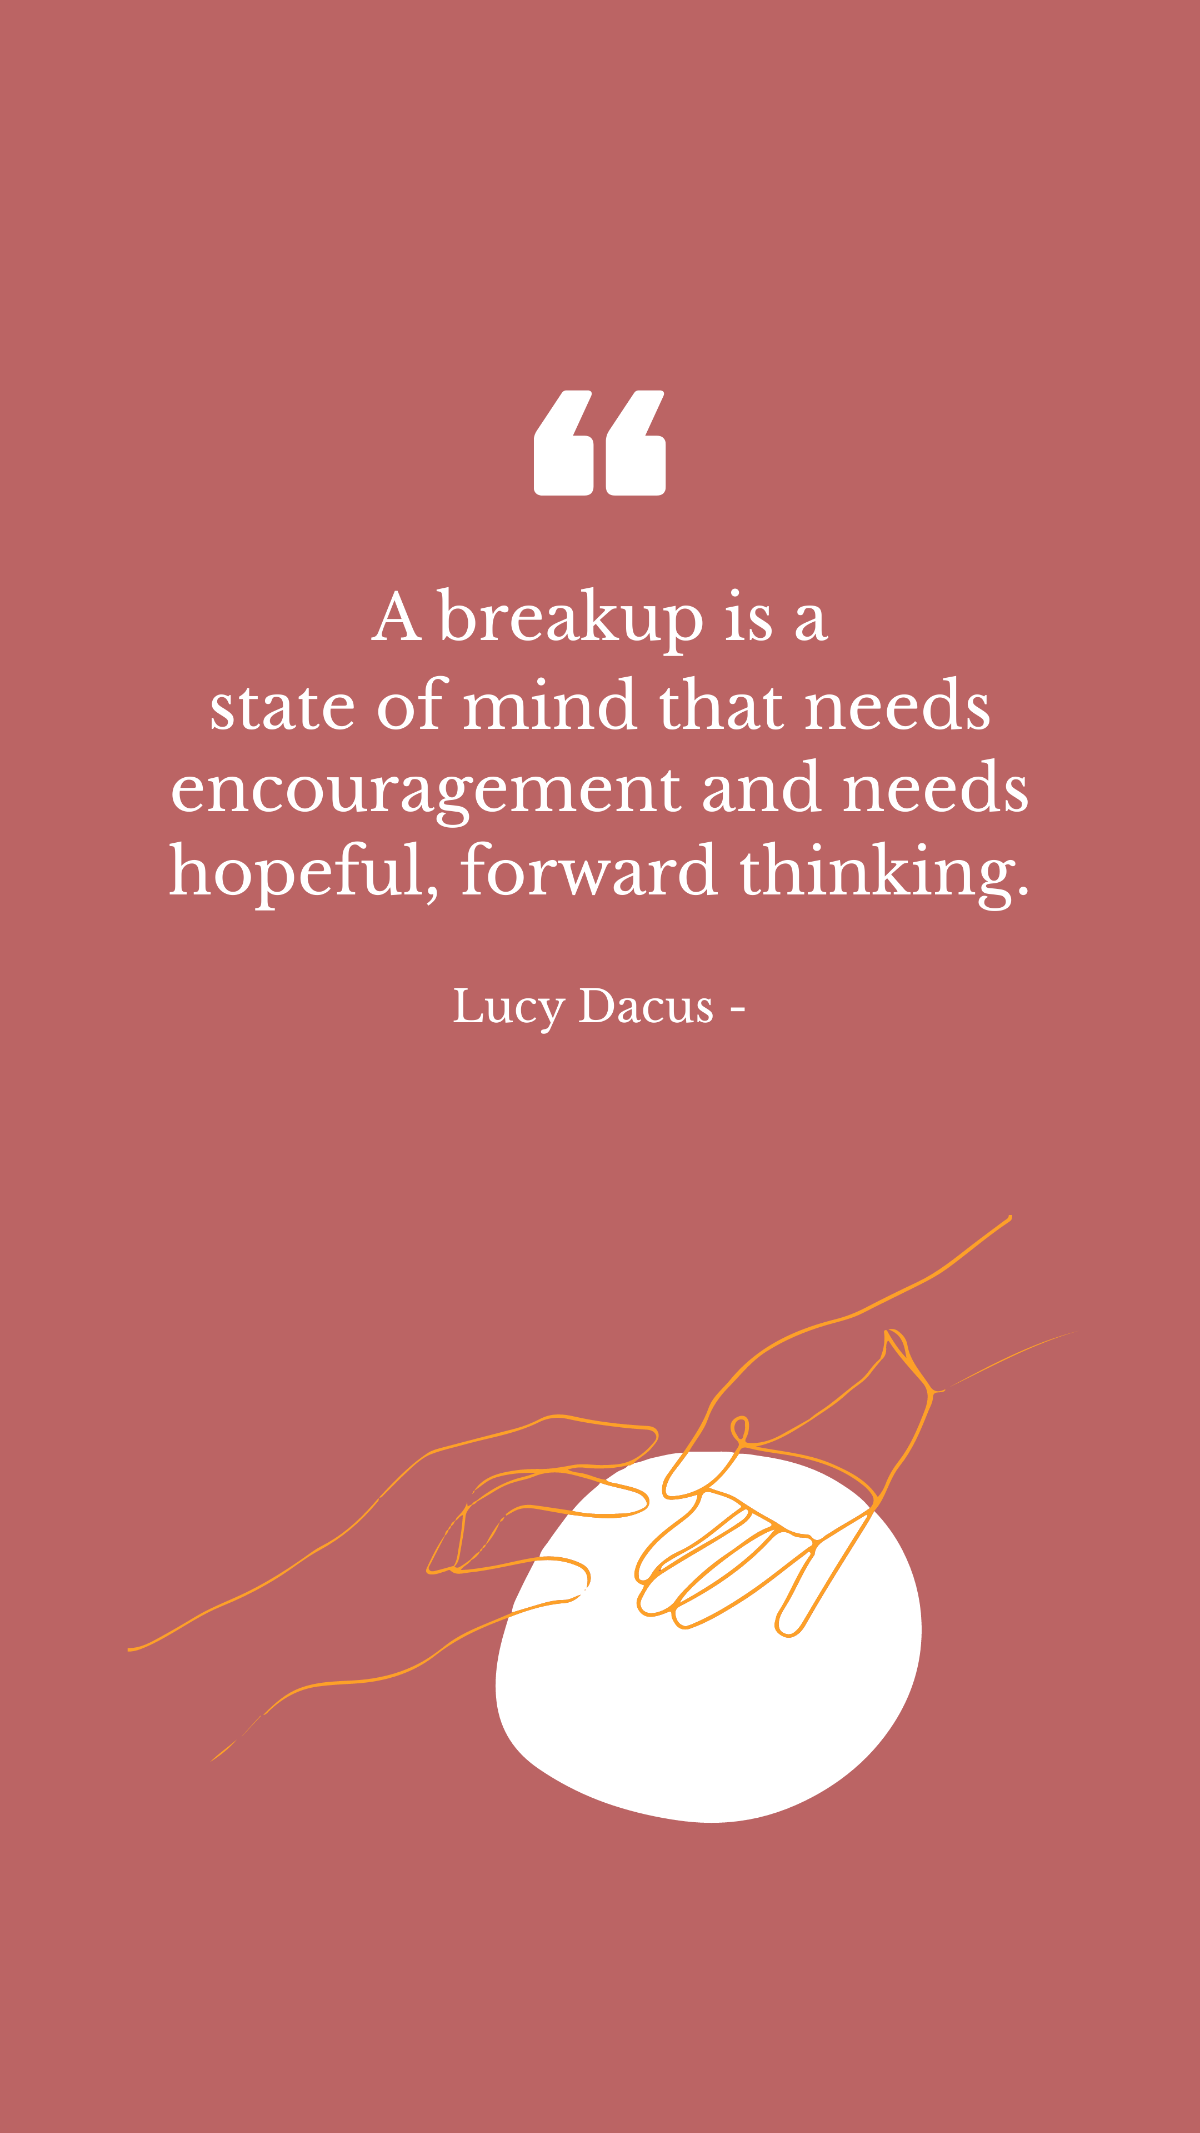 Free Lucy Dacus - A breakup is a state of mind that needs encouragement and needs hopeful, forward thinking. Template